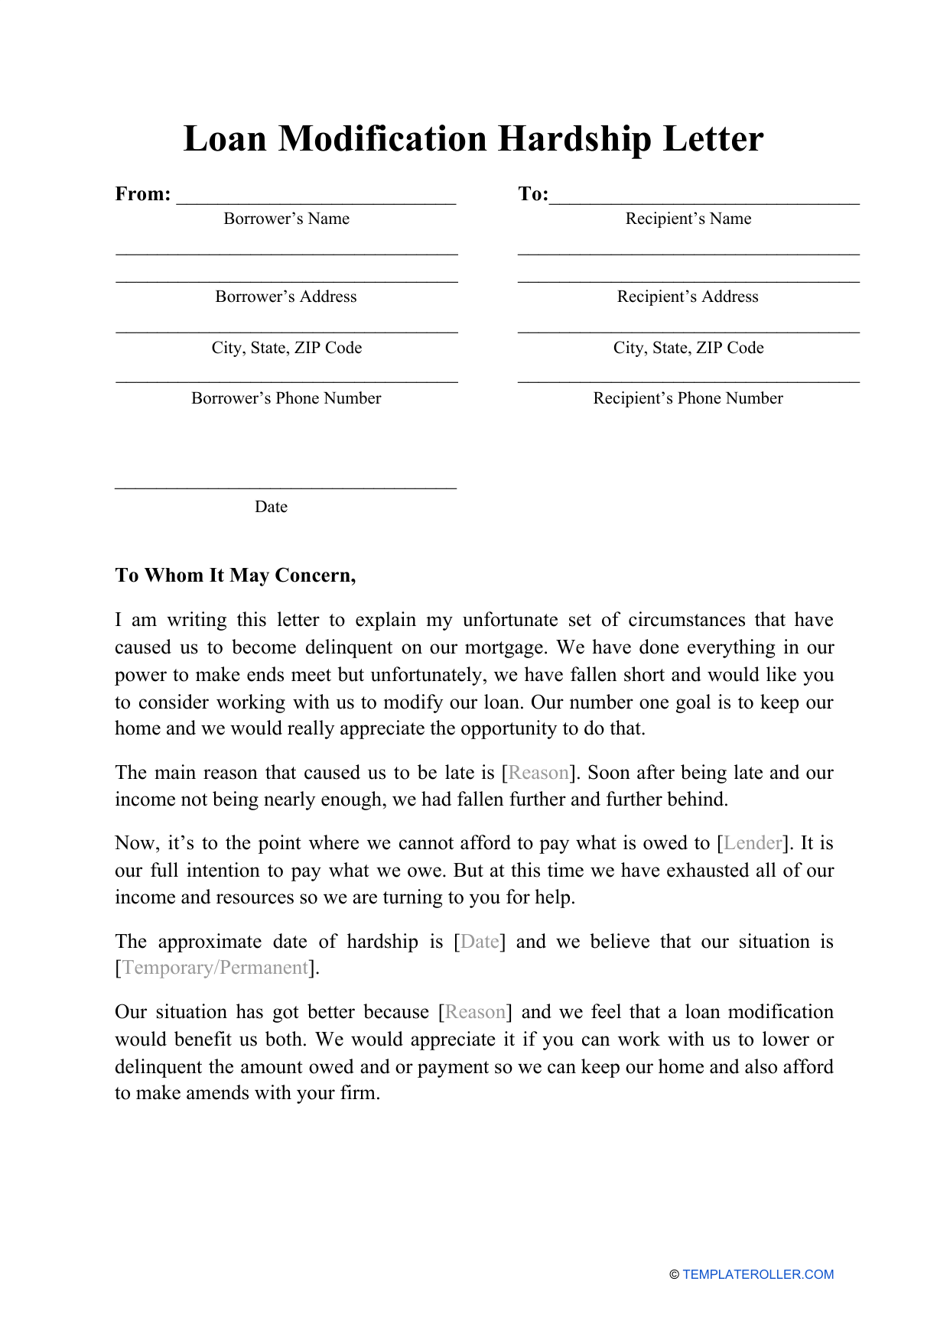 Loan Modification Hardship Letter Template, Page 1